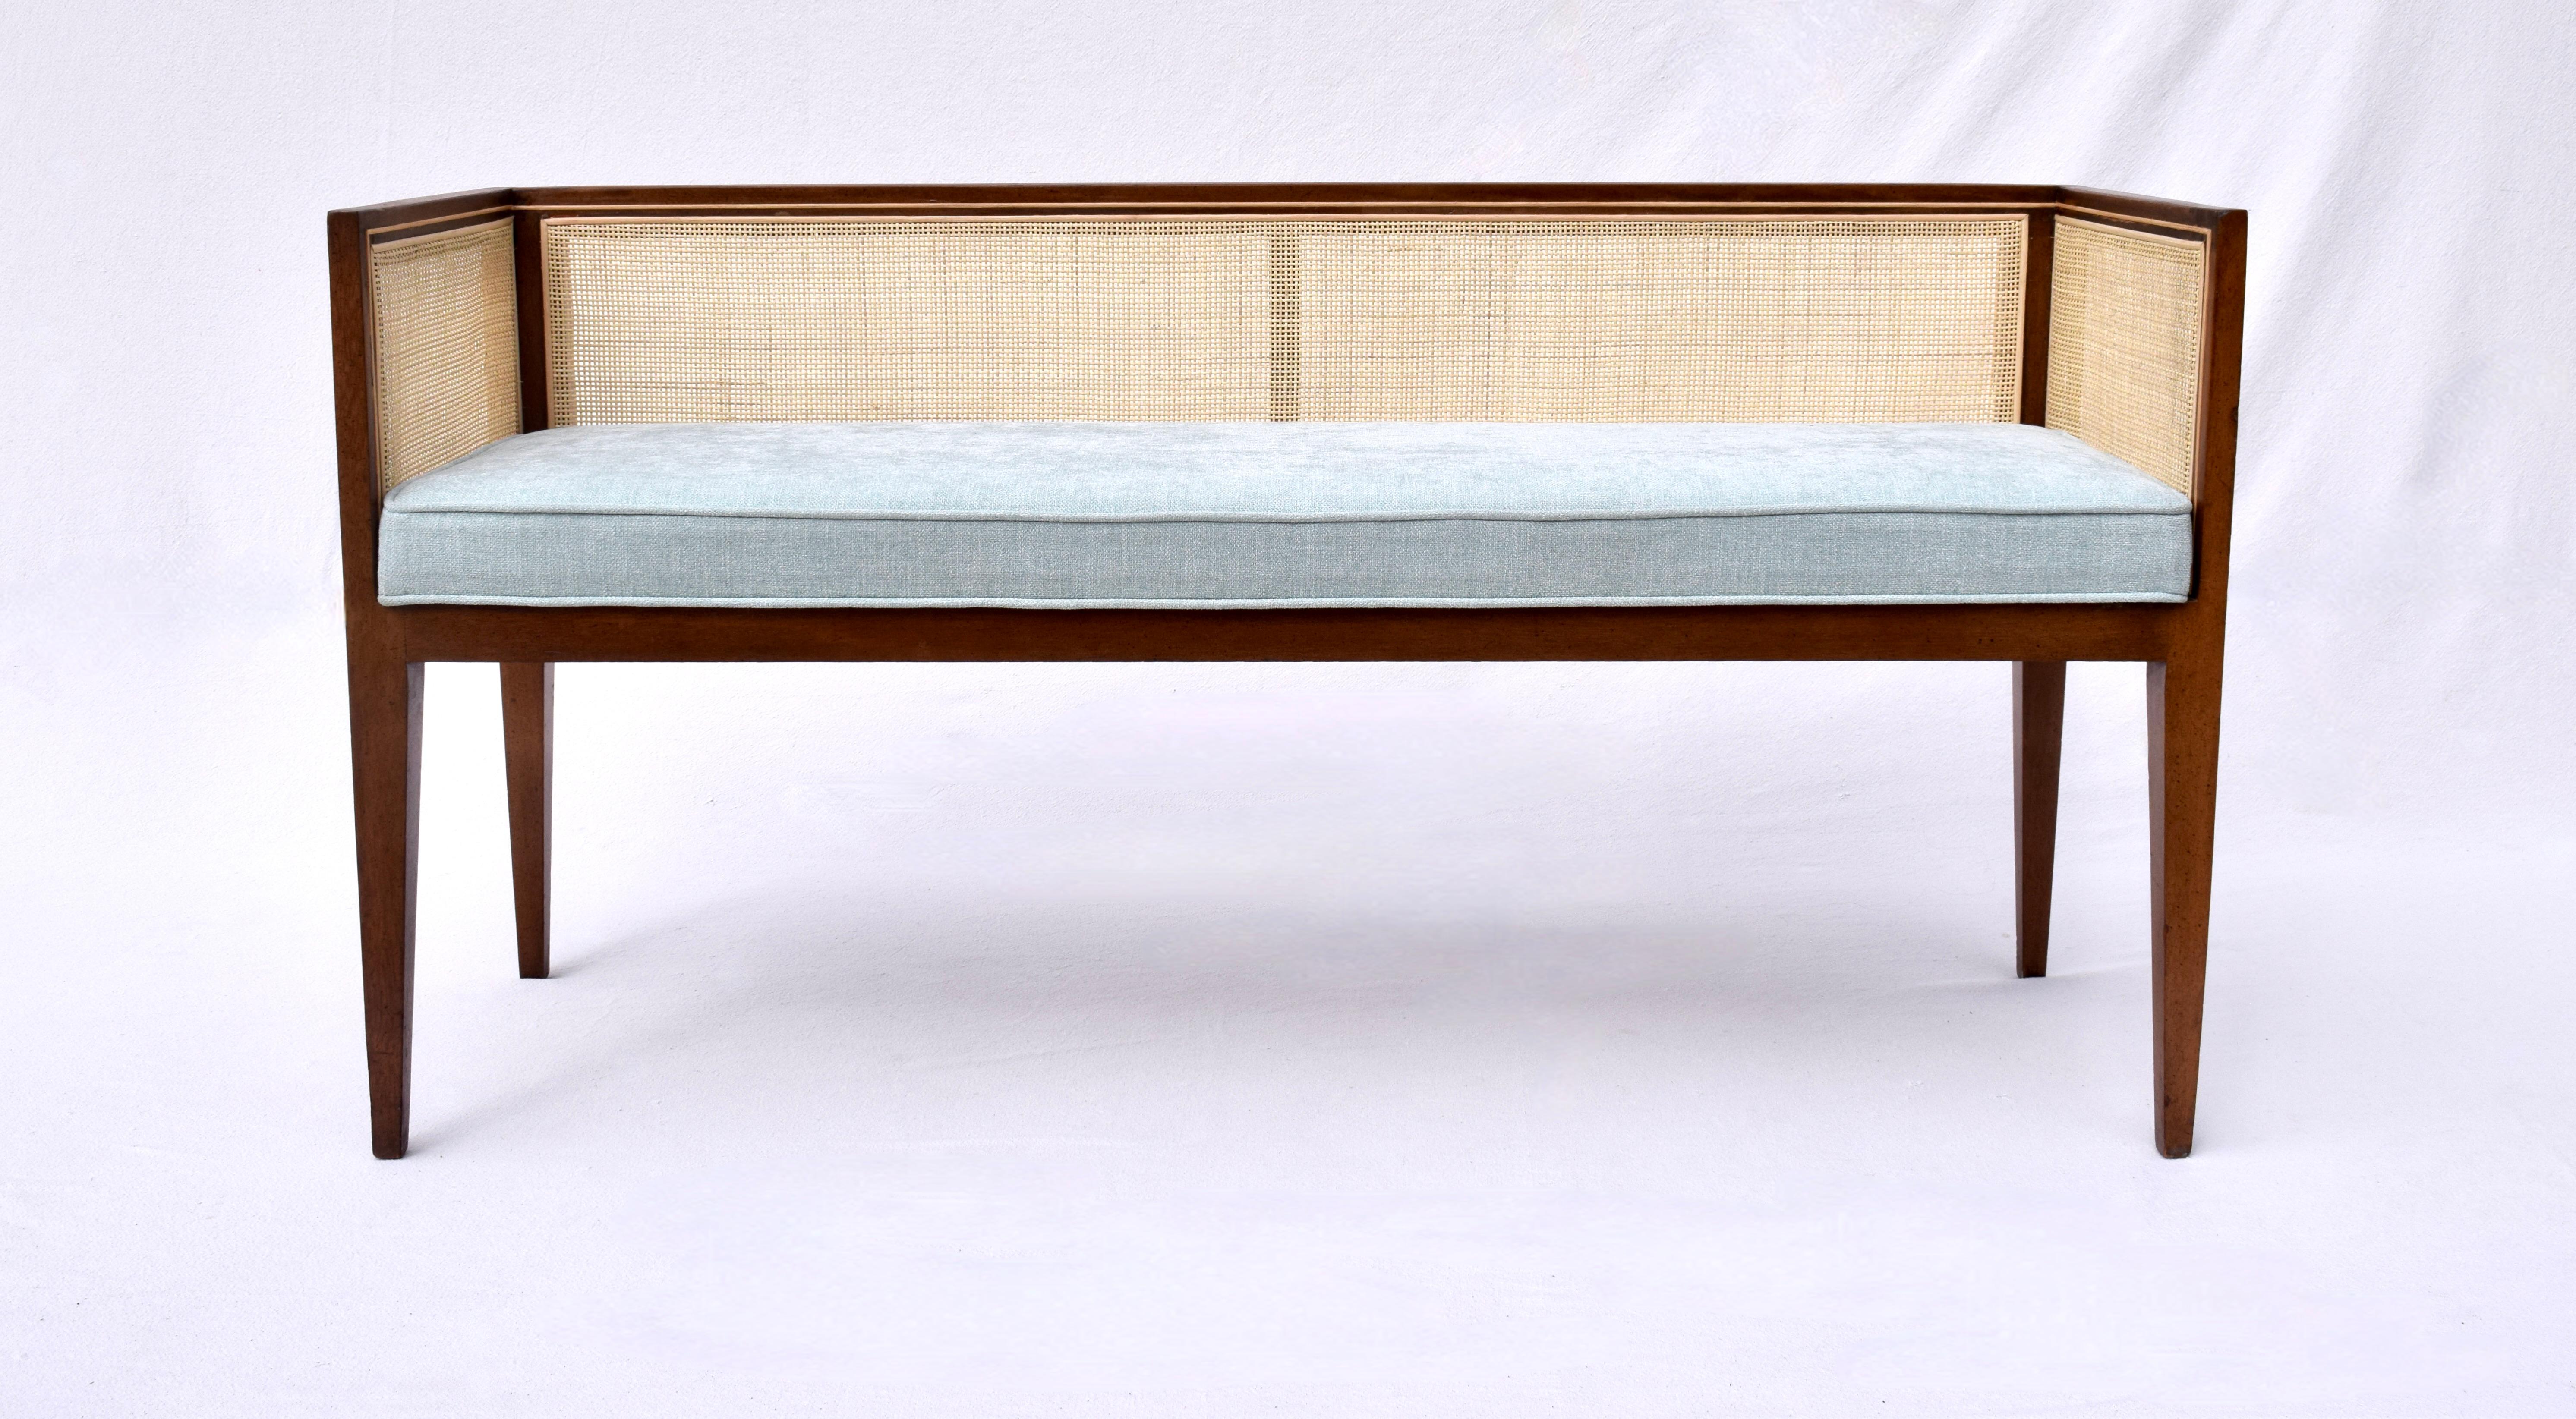 A solid walnut Mid-Century Modern window bench or settee attributed to Edward Wormley for Dunbar. Lithe line design constructed of fully restored walnut frame with new fine scale caning, seat and bolster cushions upholstered in soft blue cotton